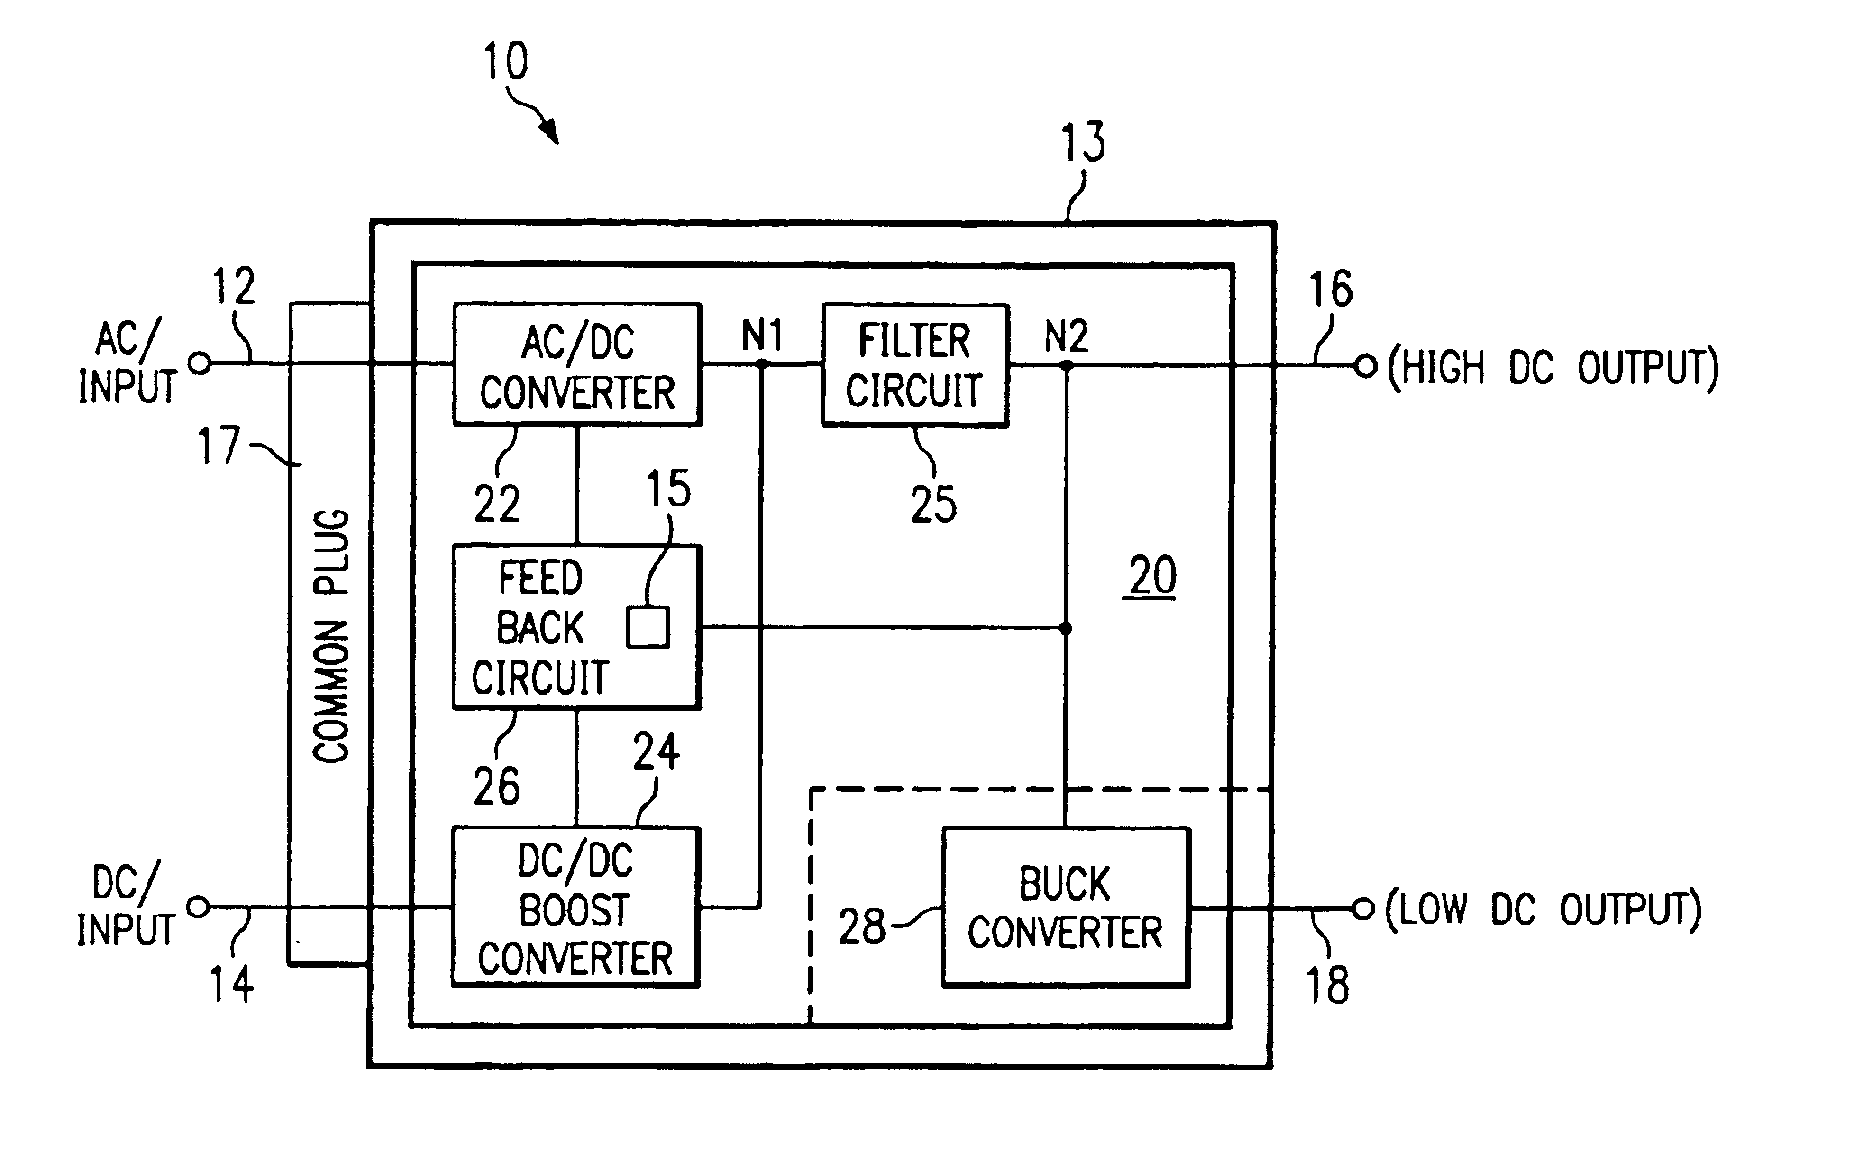 Dual input AC and DC power supply having a programmable DC output utilizing a modular programmable feedback loop